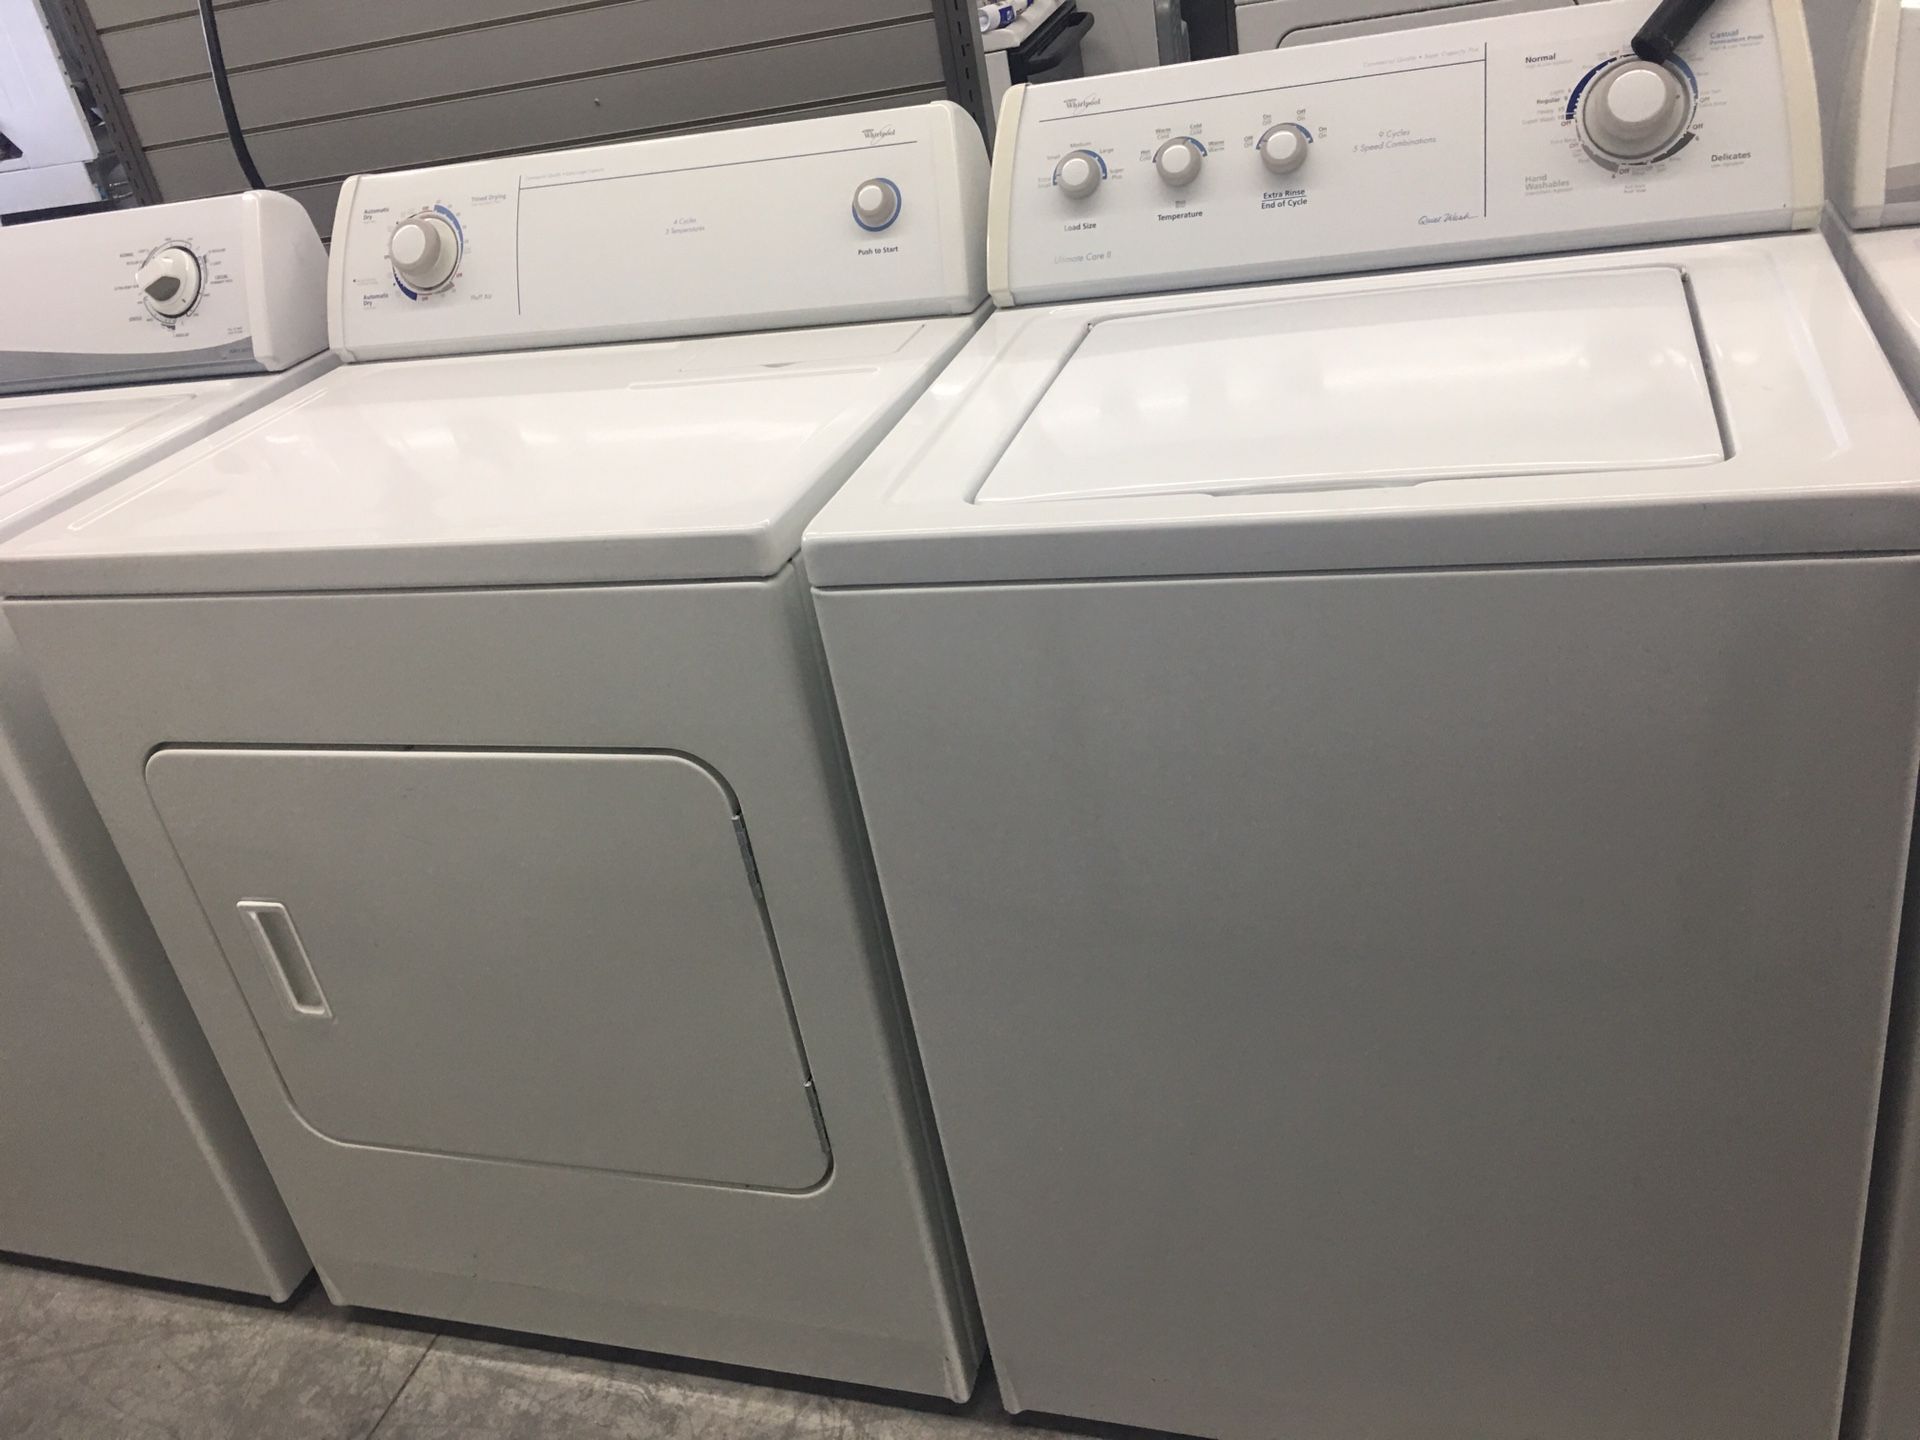 WHIRLPOOL WASHER AND DRYER SET!